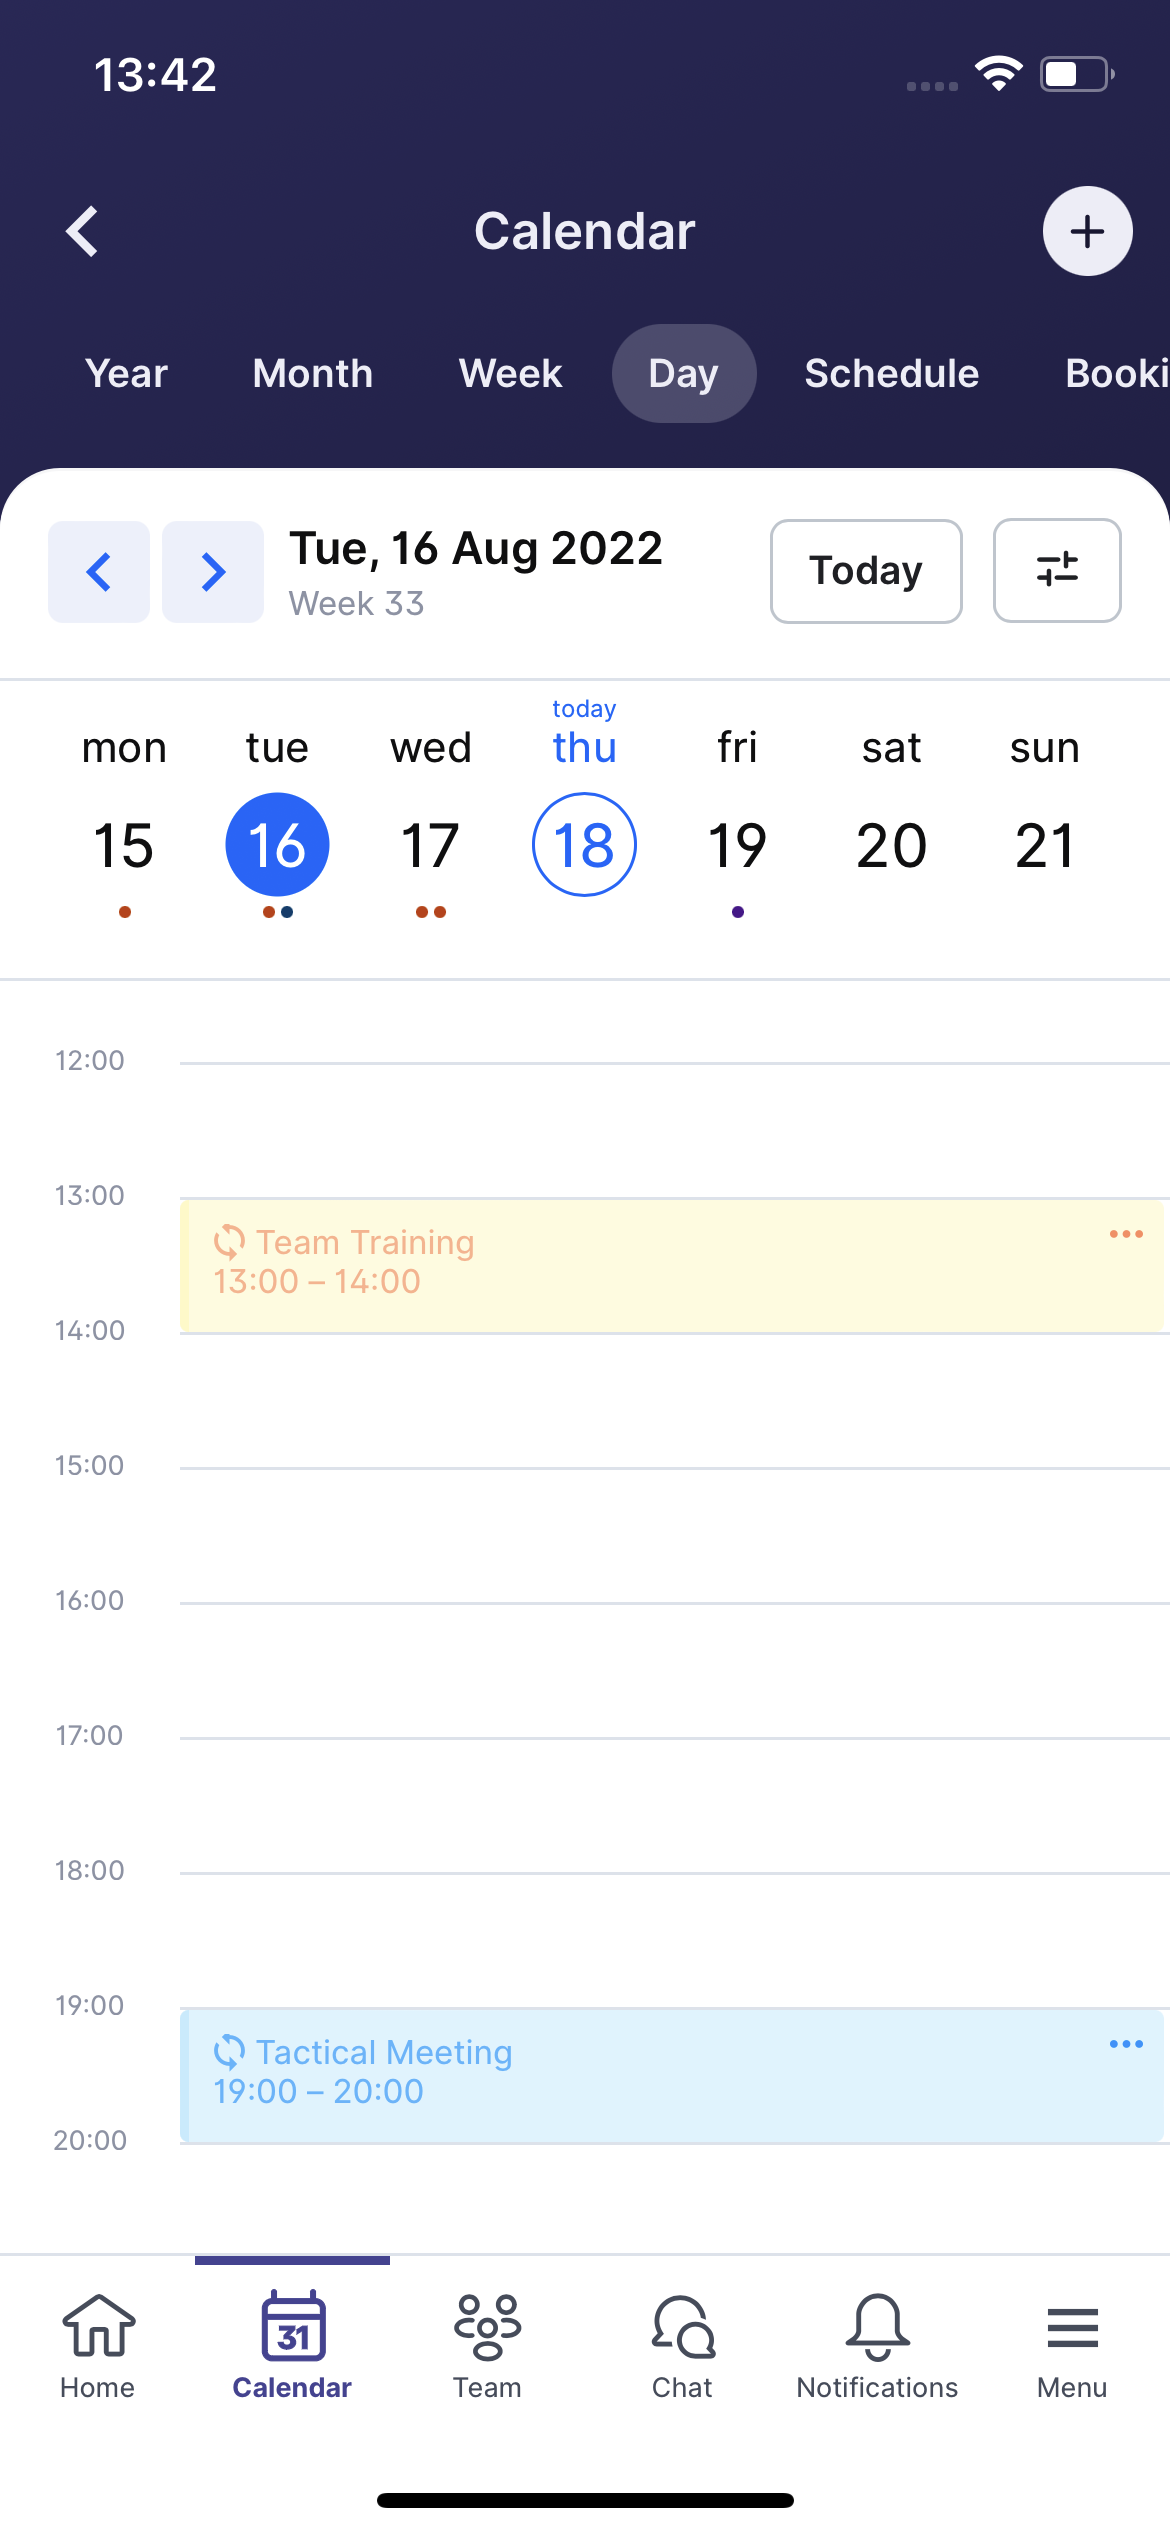 View from inside a team's calendar on a mobile device.